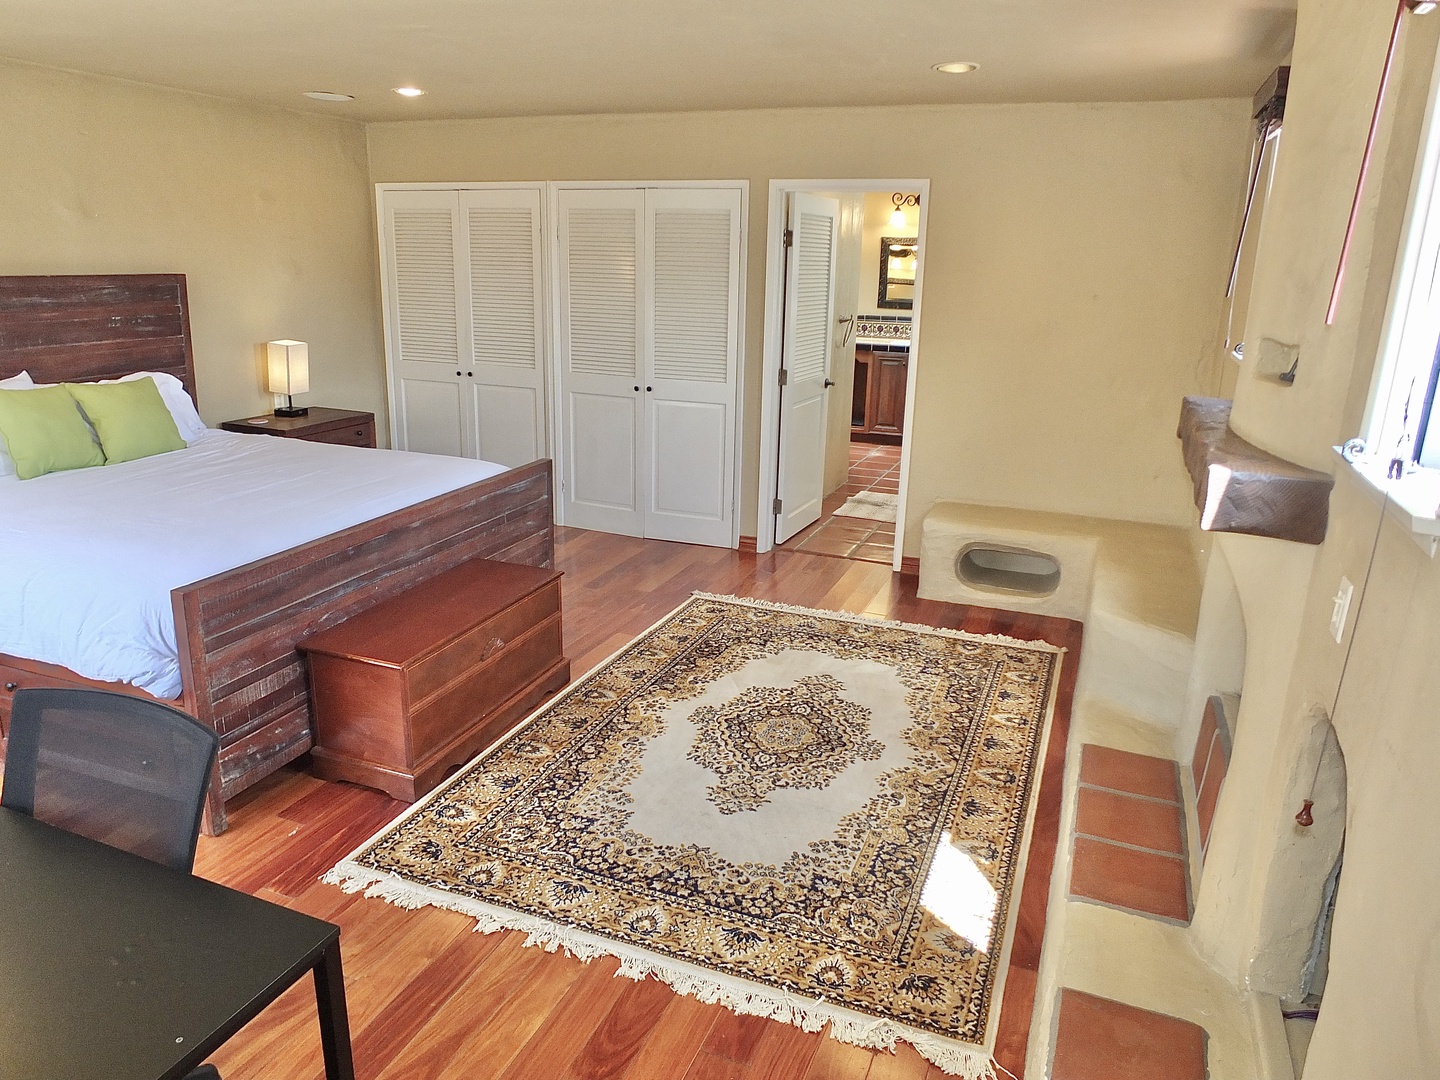 The spacious 2nd floor bedroom offers a king bed, deck access, & private en suite